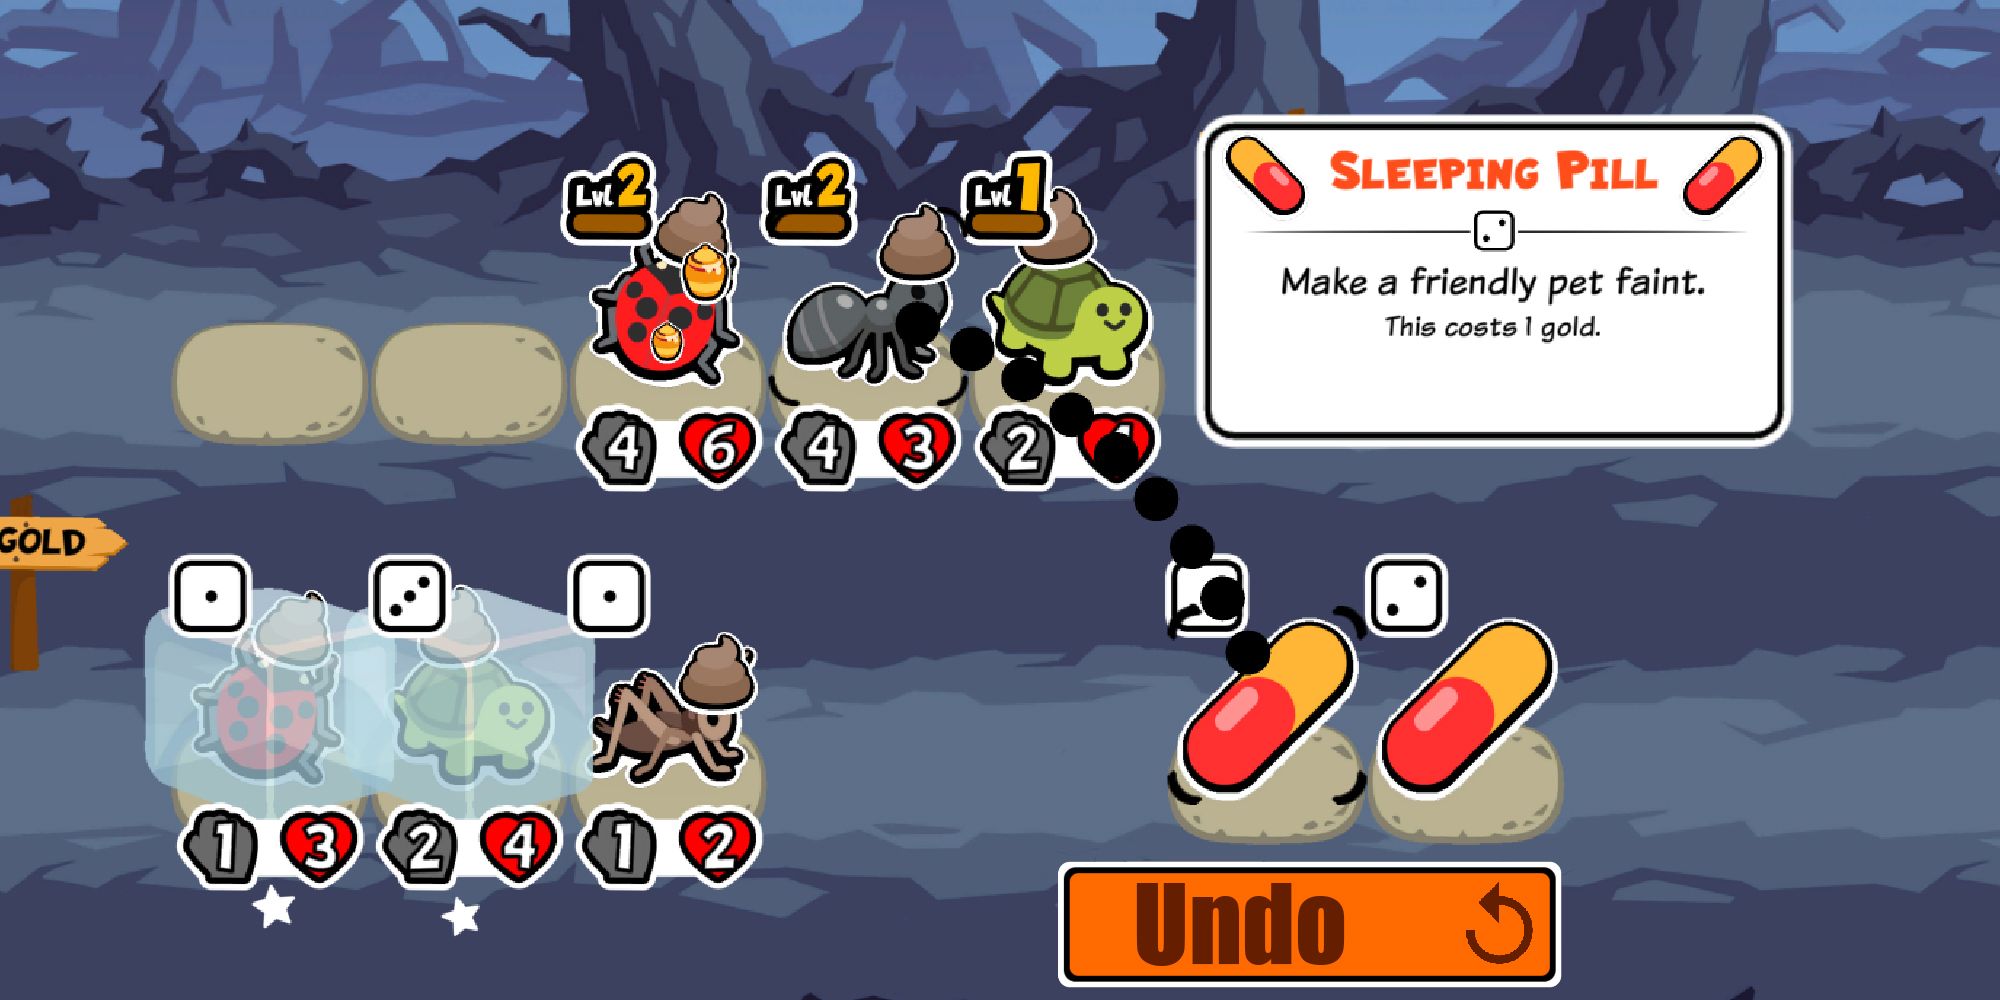 Super Auto Pets - A Mock-Up Of What The Undo Button Could Look Like